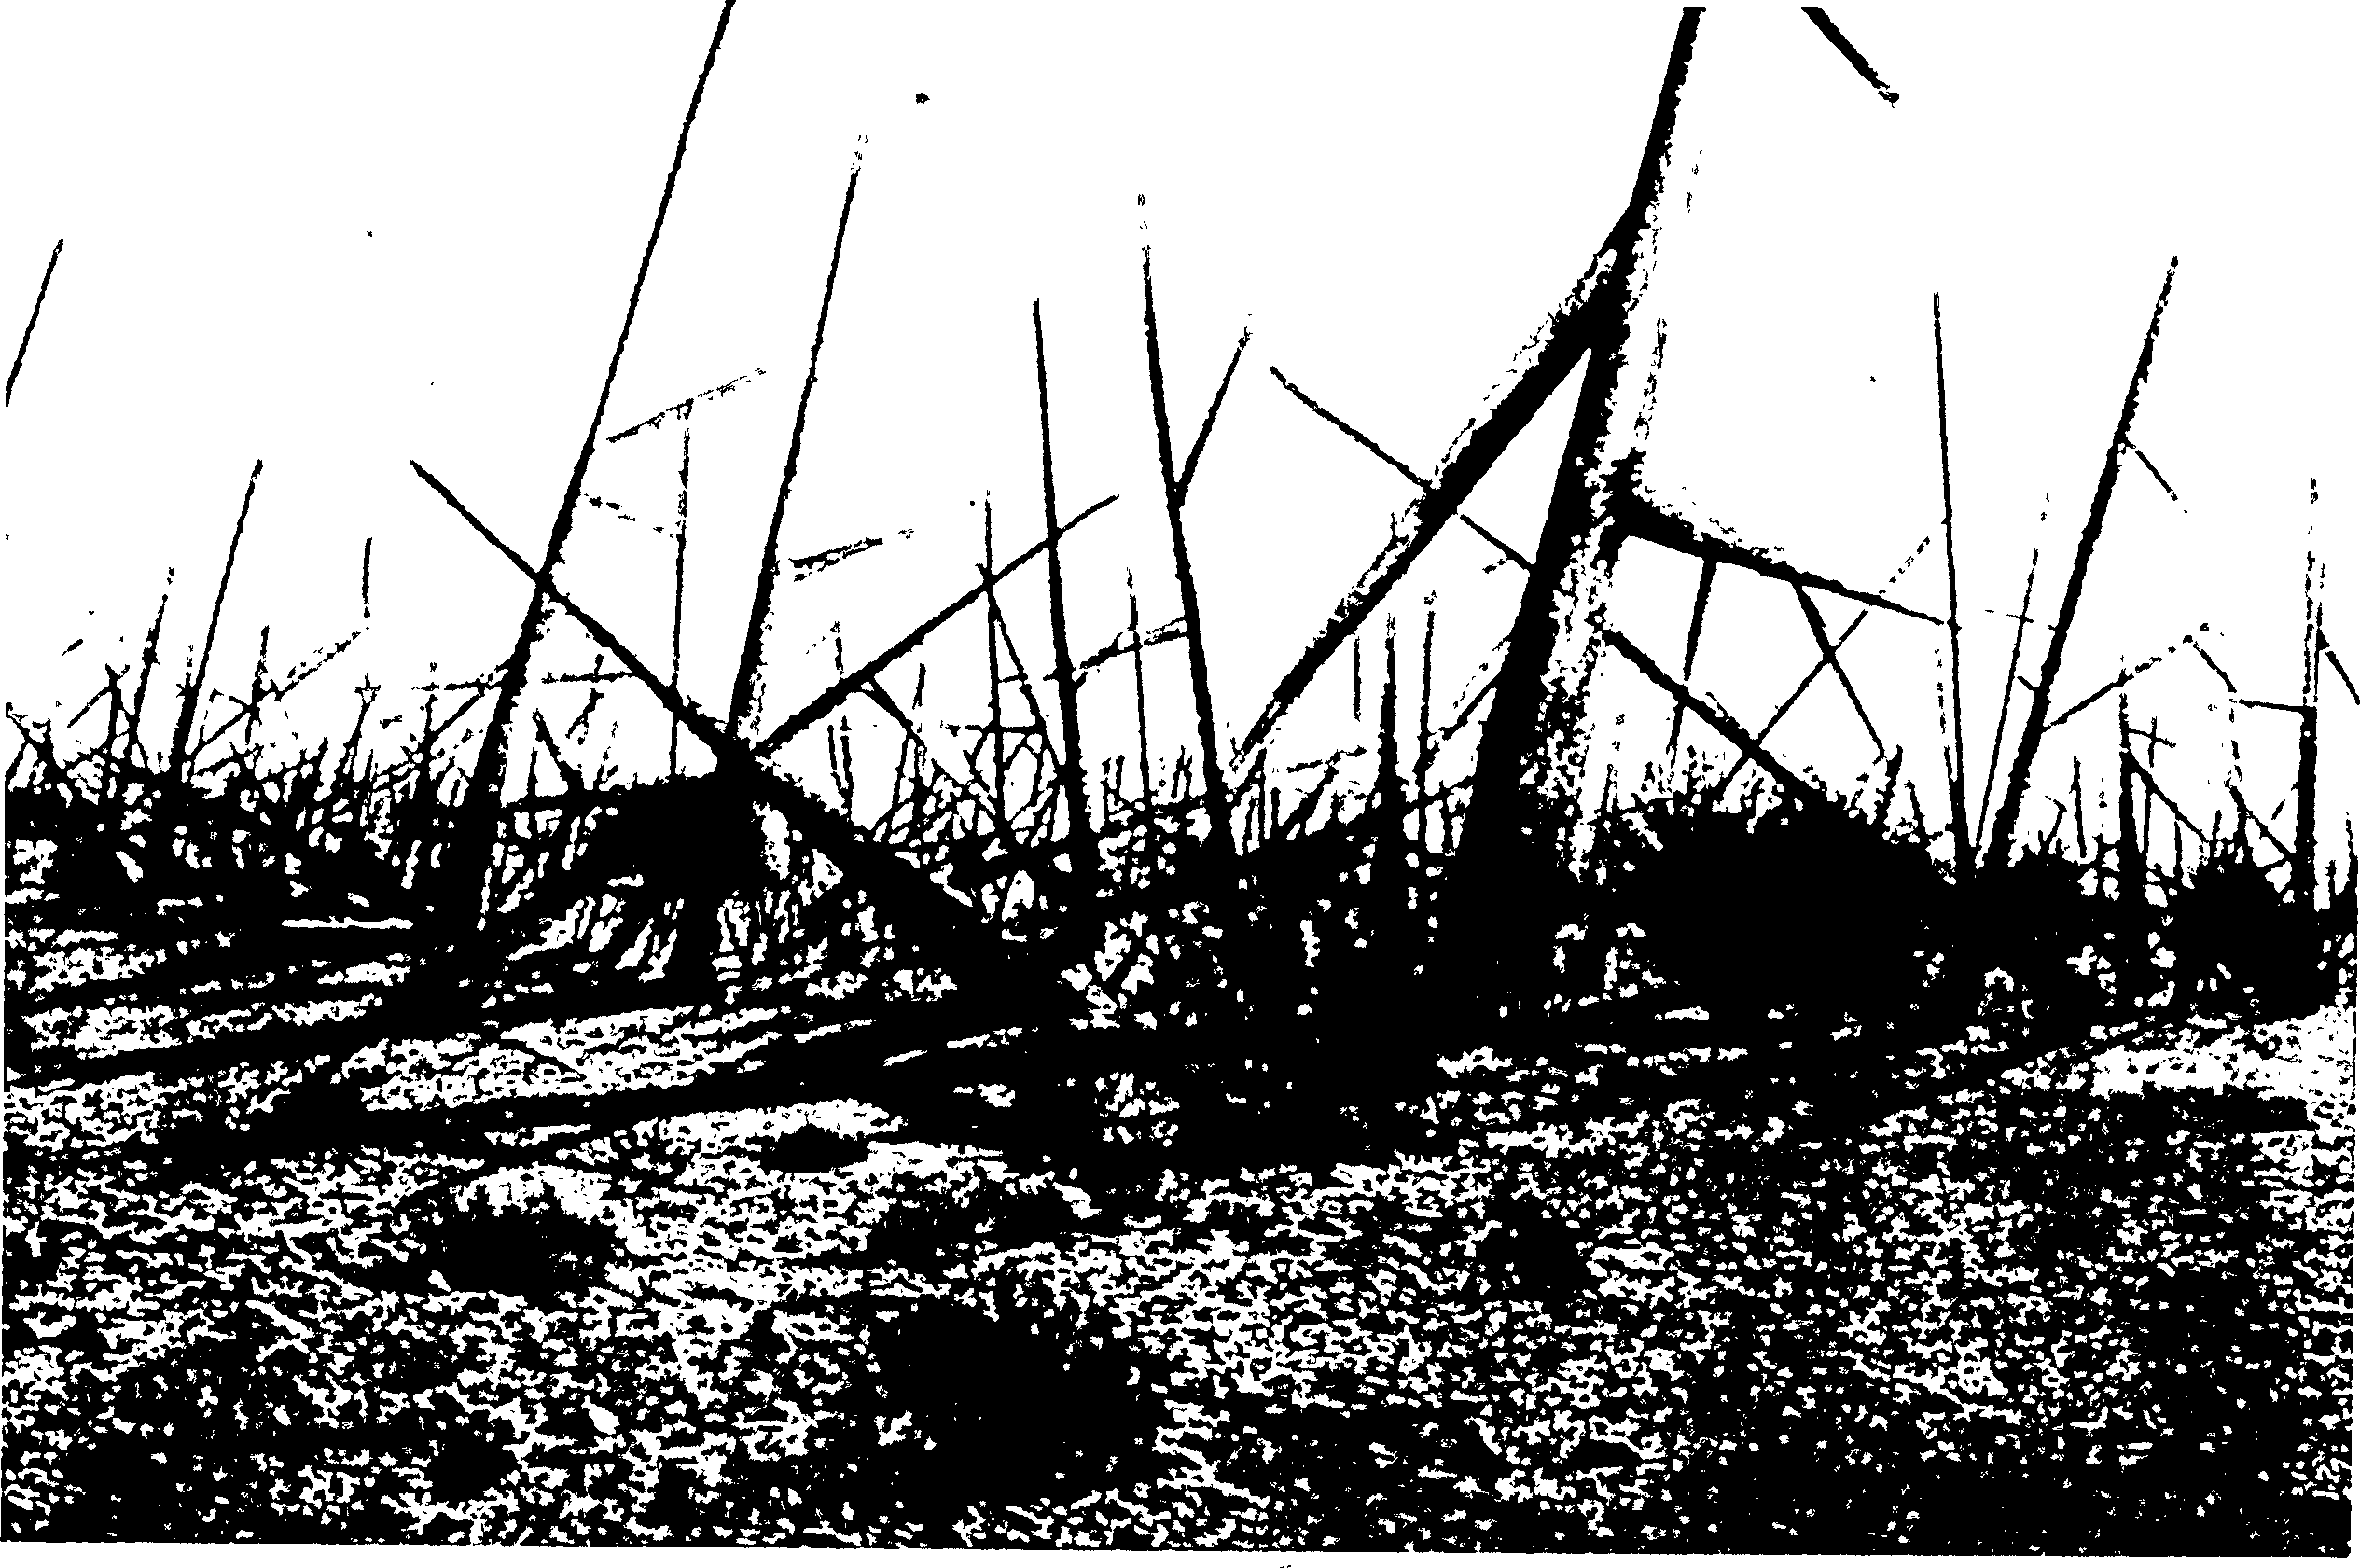 Drawing of a tangle of large stone spikes among desert shrubs